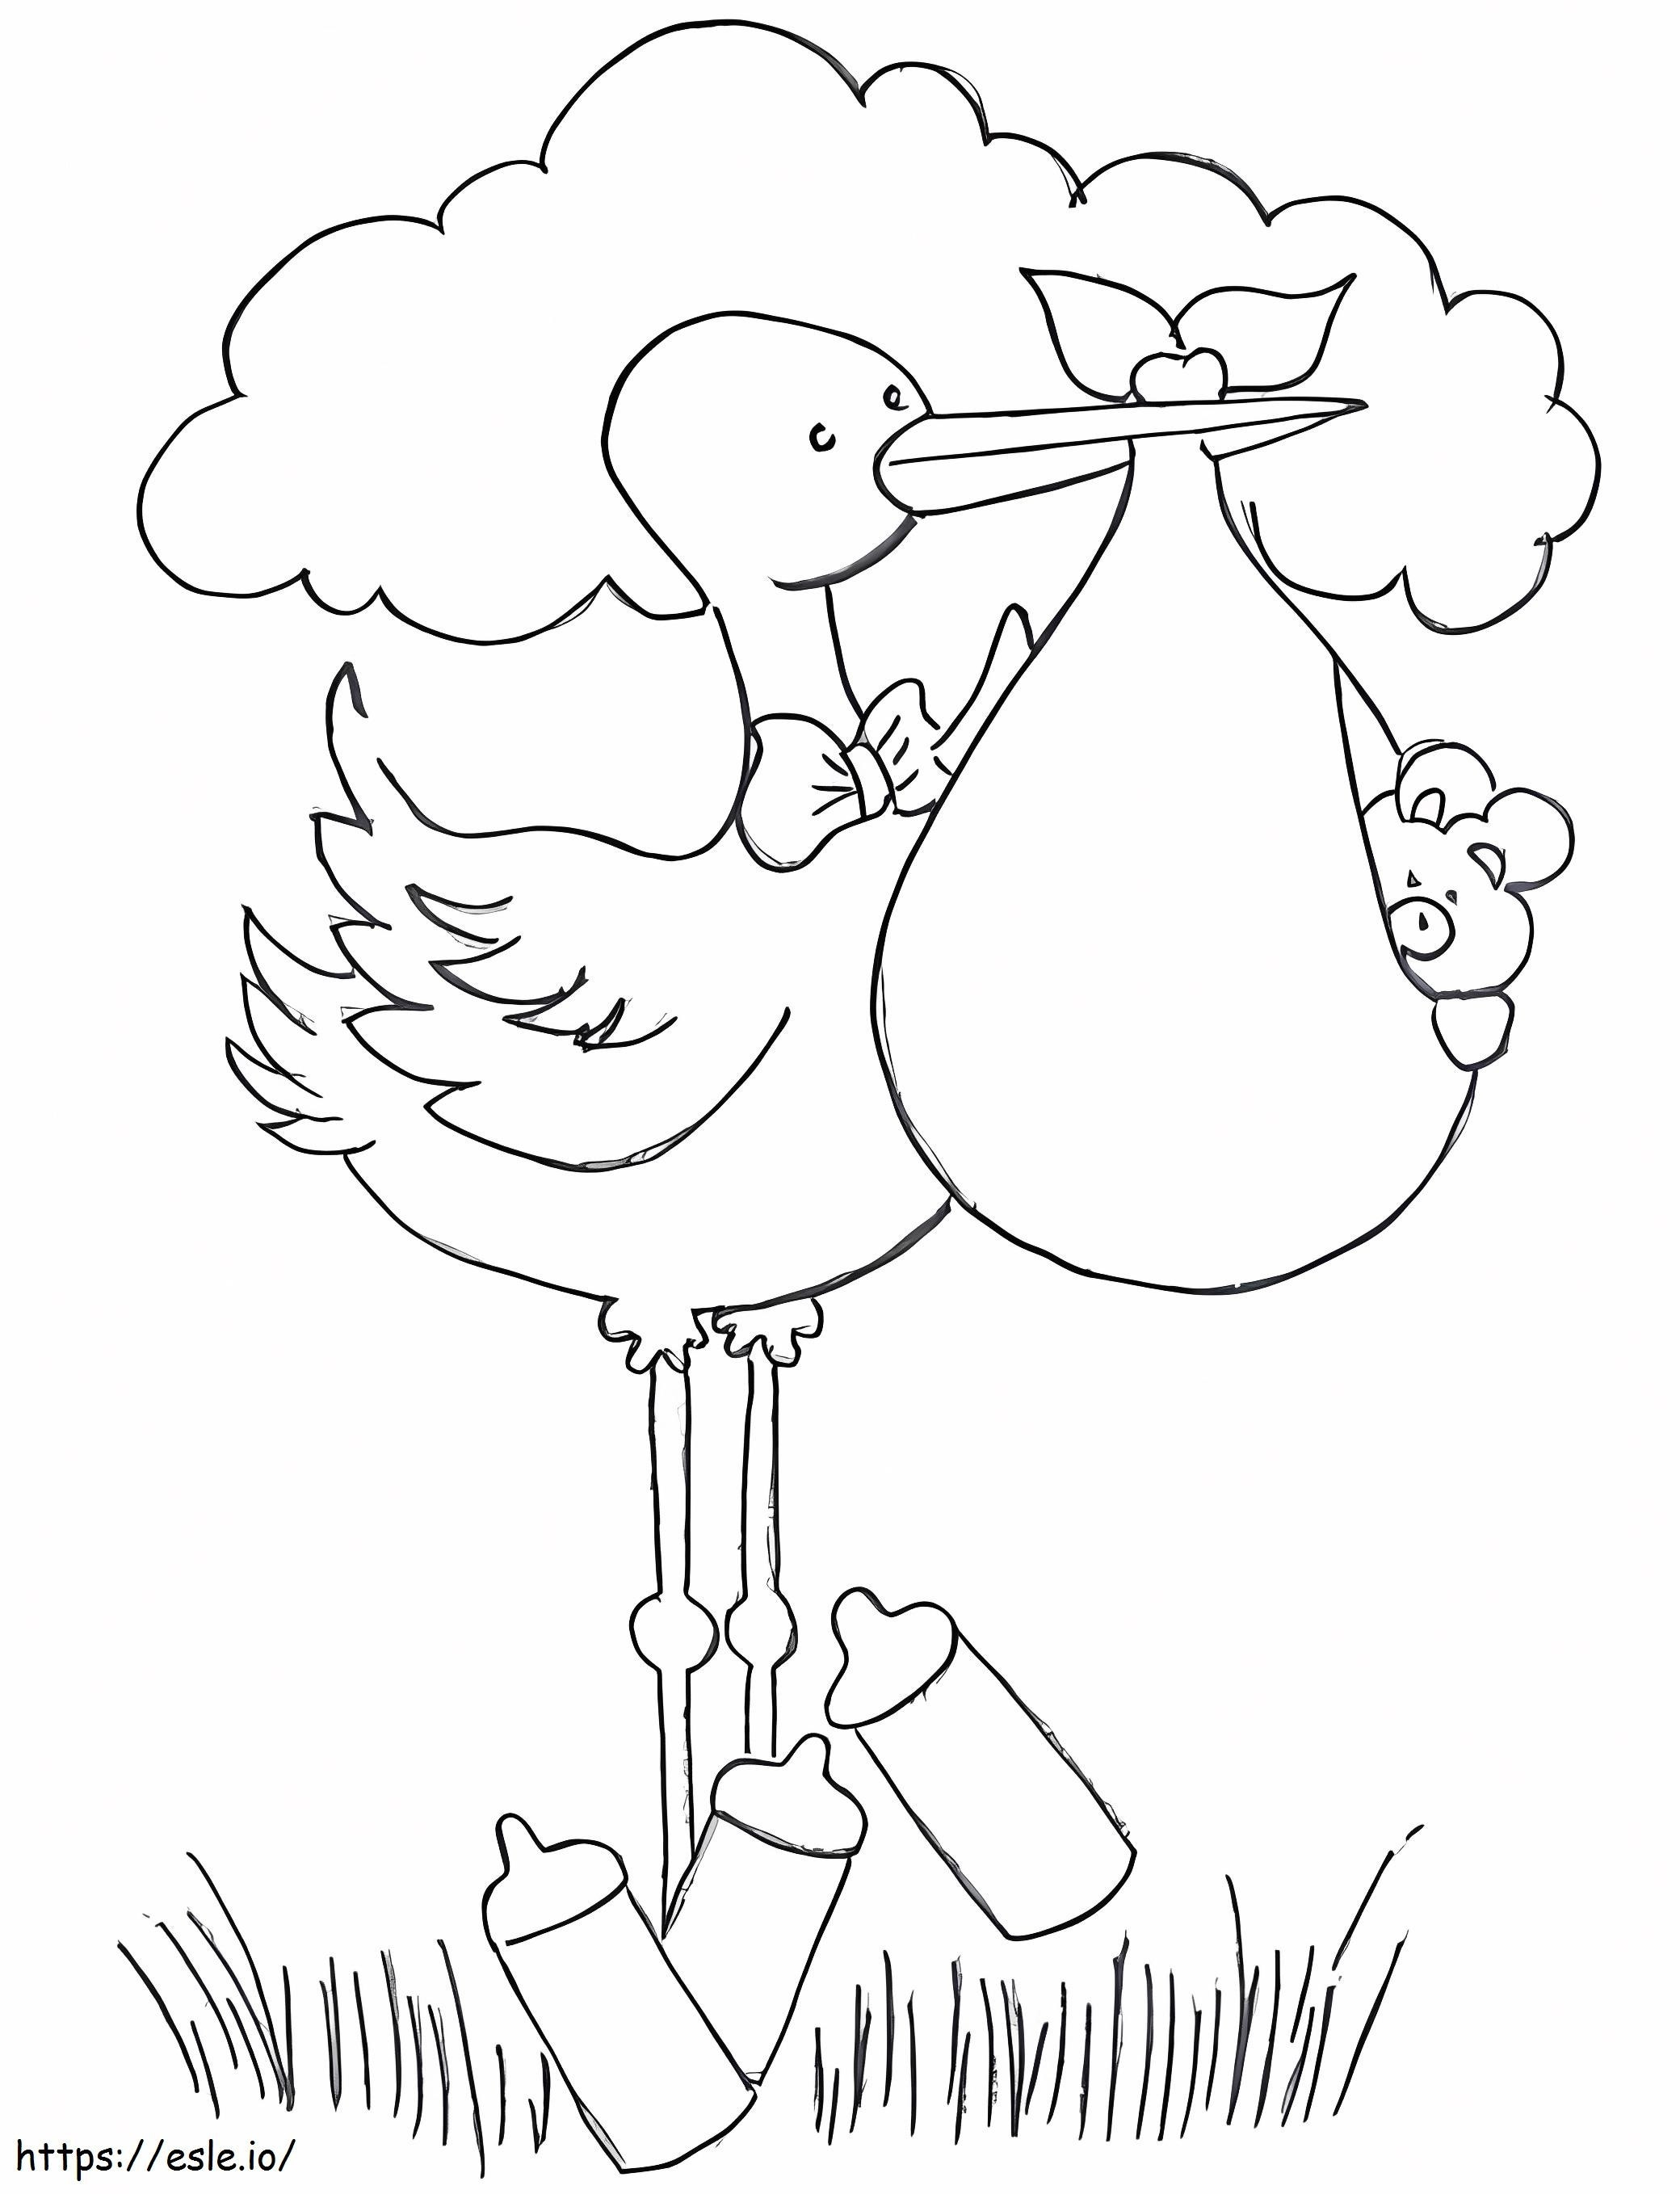 Stork 3 coloring page